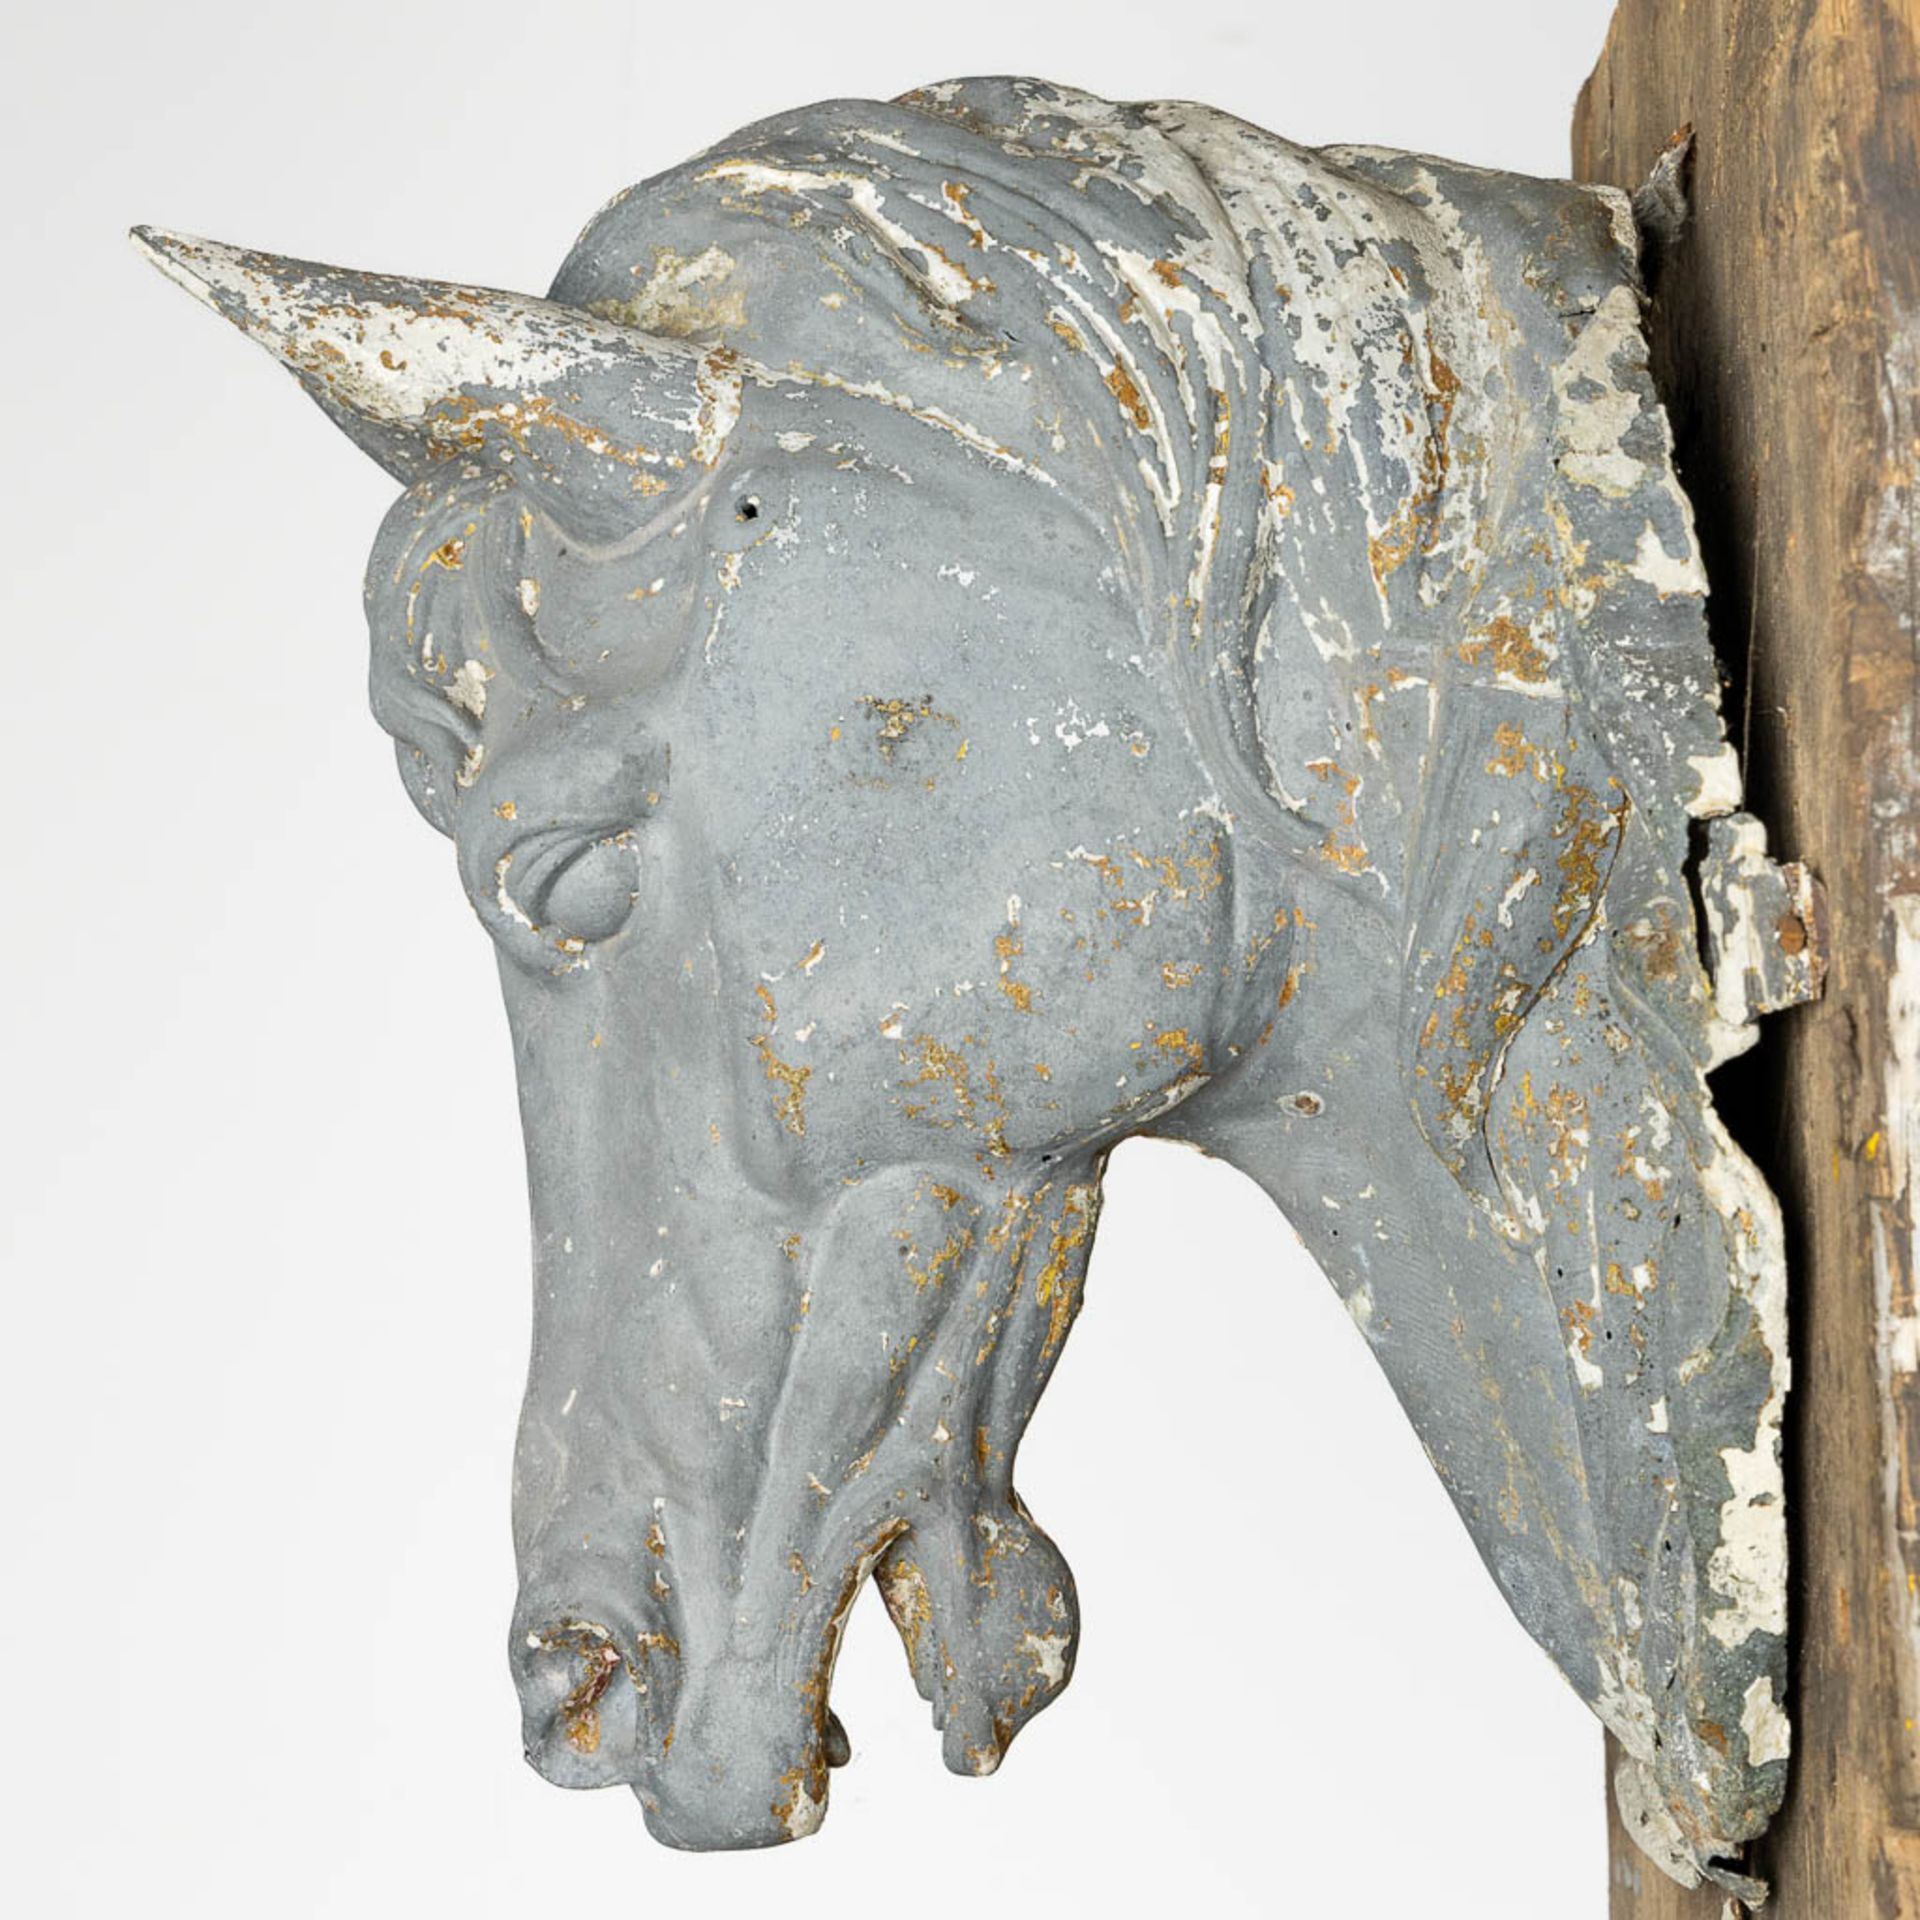 An antique zinc Horse Head, mounted on a wood board. Circa 1920. (L:40 x W:39 x H:44 cm) - Image 12 of 13